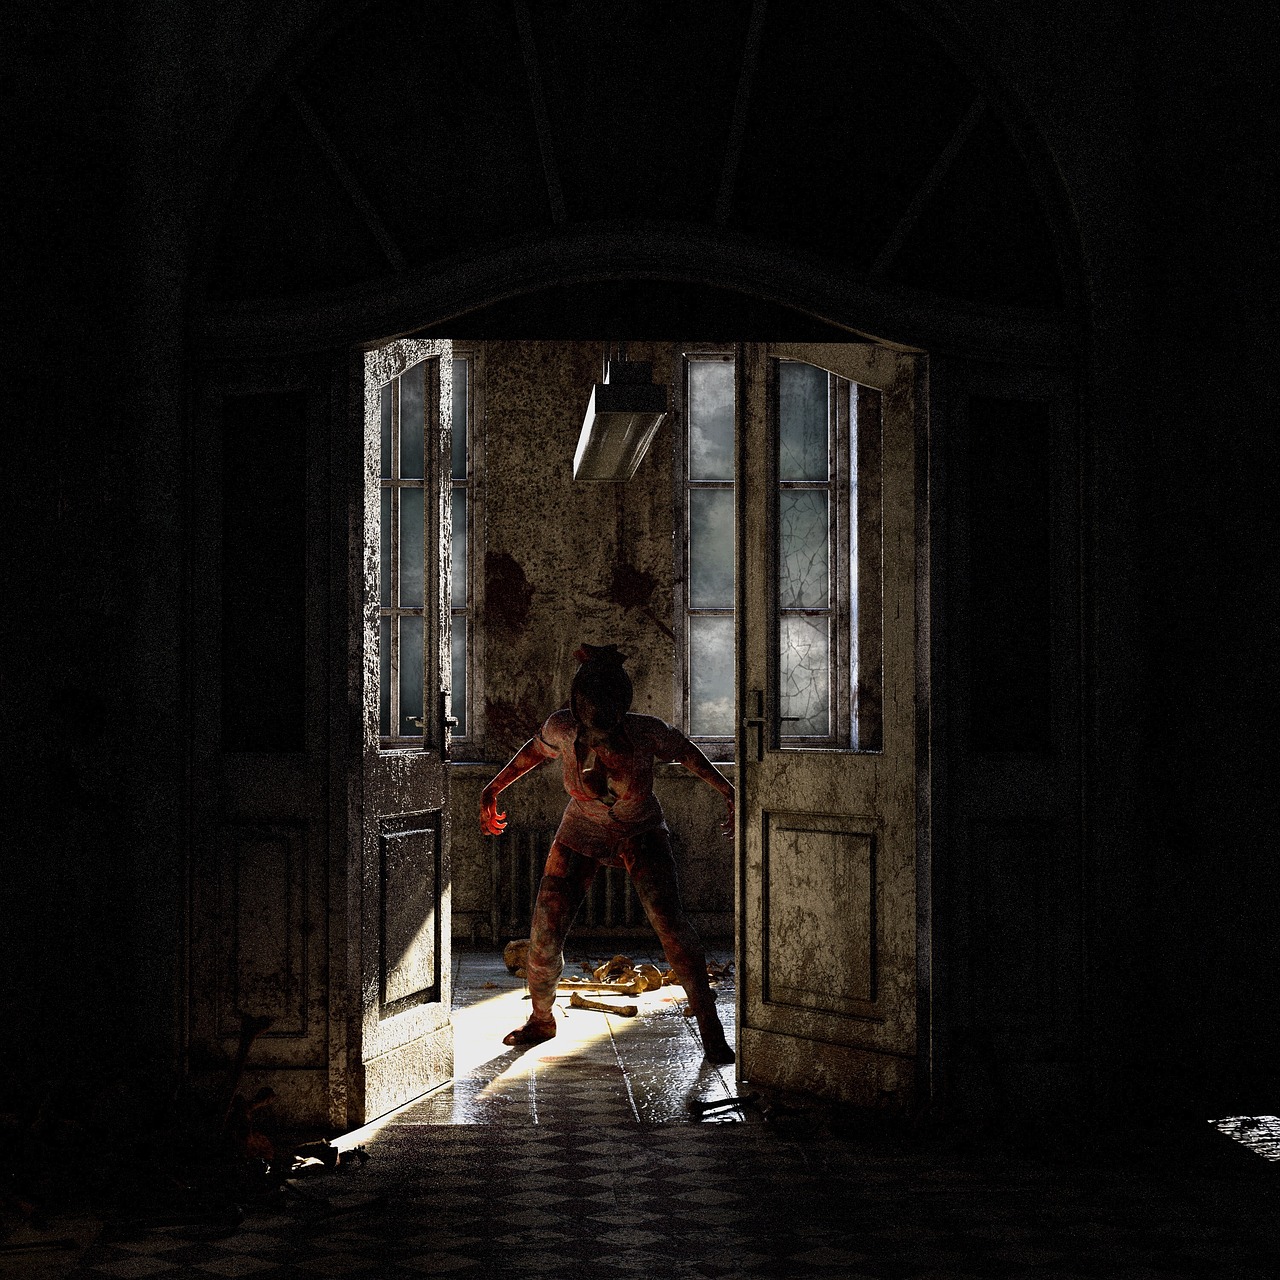 a woman standing in an open door way, concept art, by maxim verehin, conceptual art, award winning horror photography, the last of us”, screaming in desperation, in a old house. hyper realistic